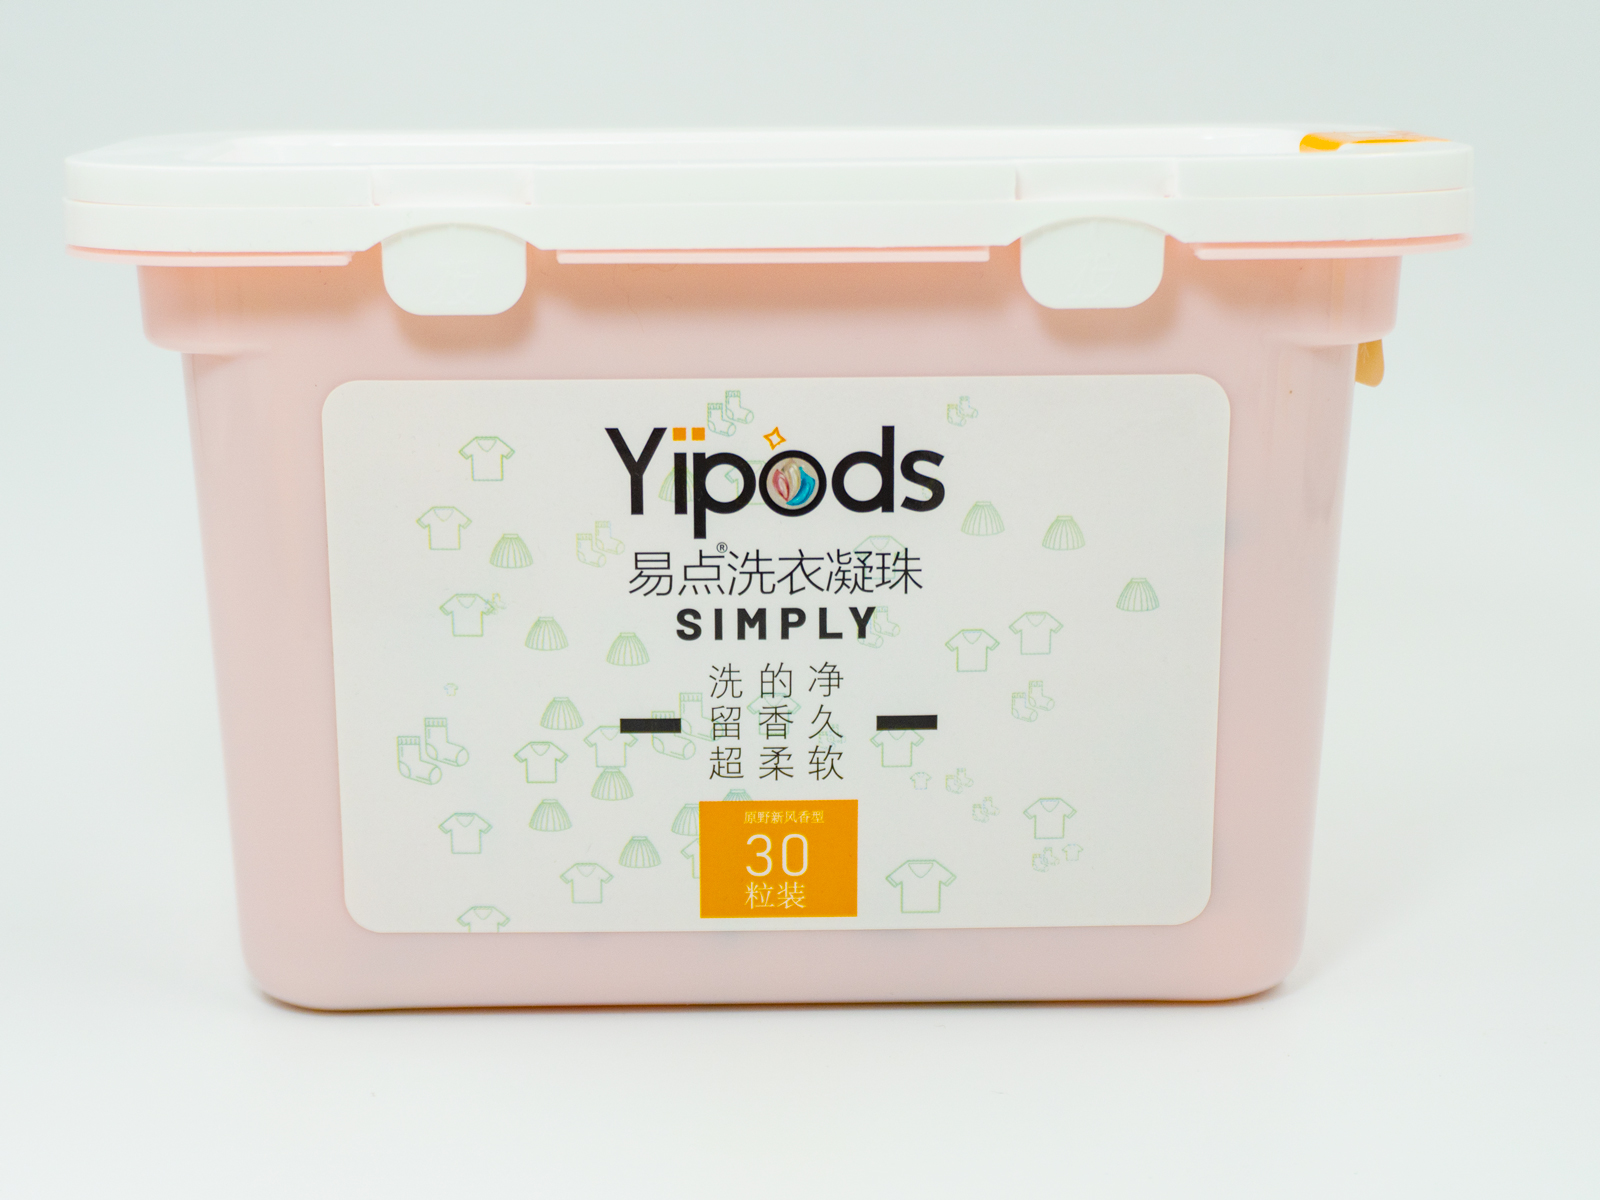 yipods brand laundry pods in plastic tub